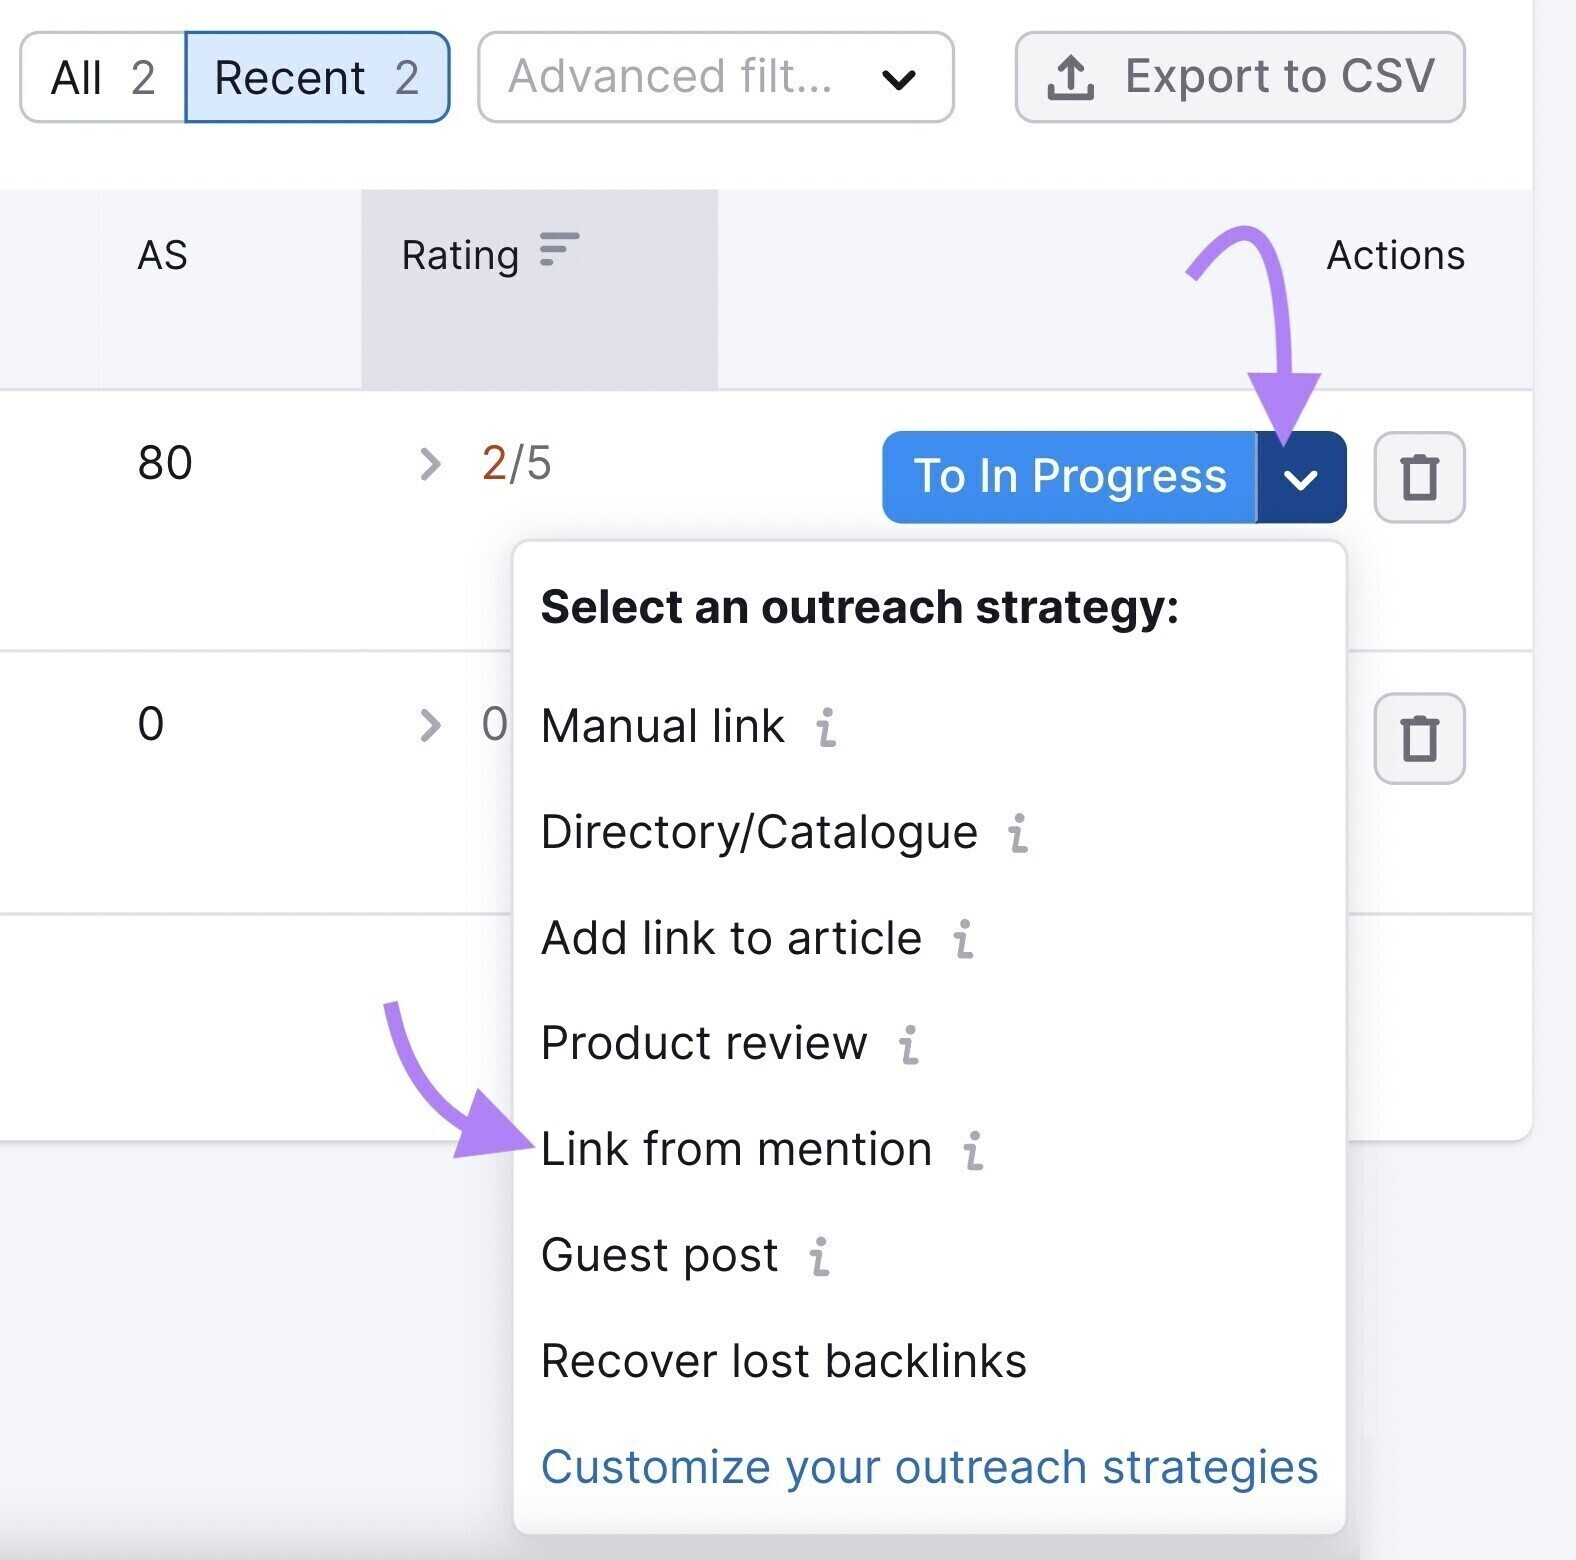 “Link from mention" option selected under the “To In Progress” drop-down menu, next to the selected domain